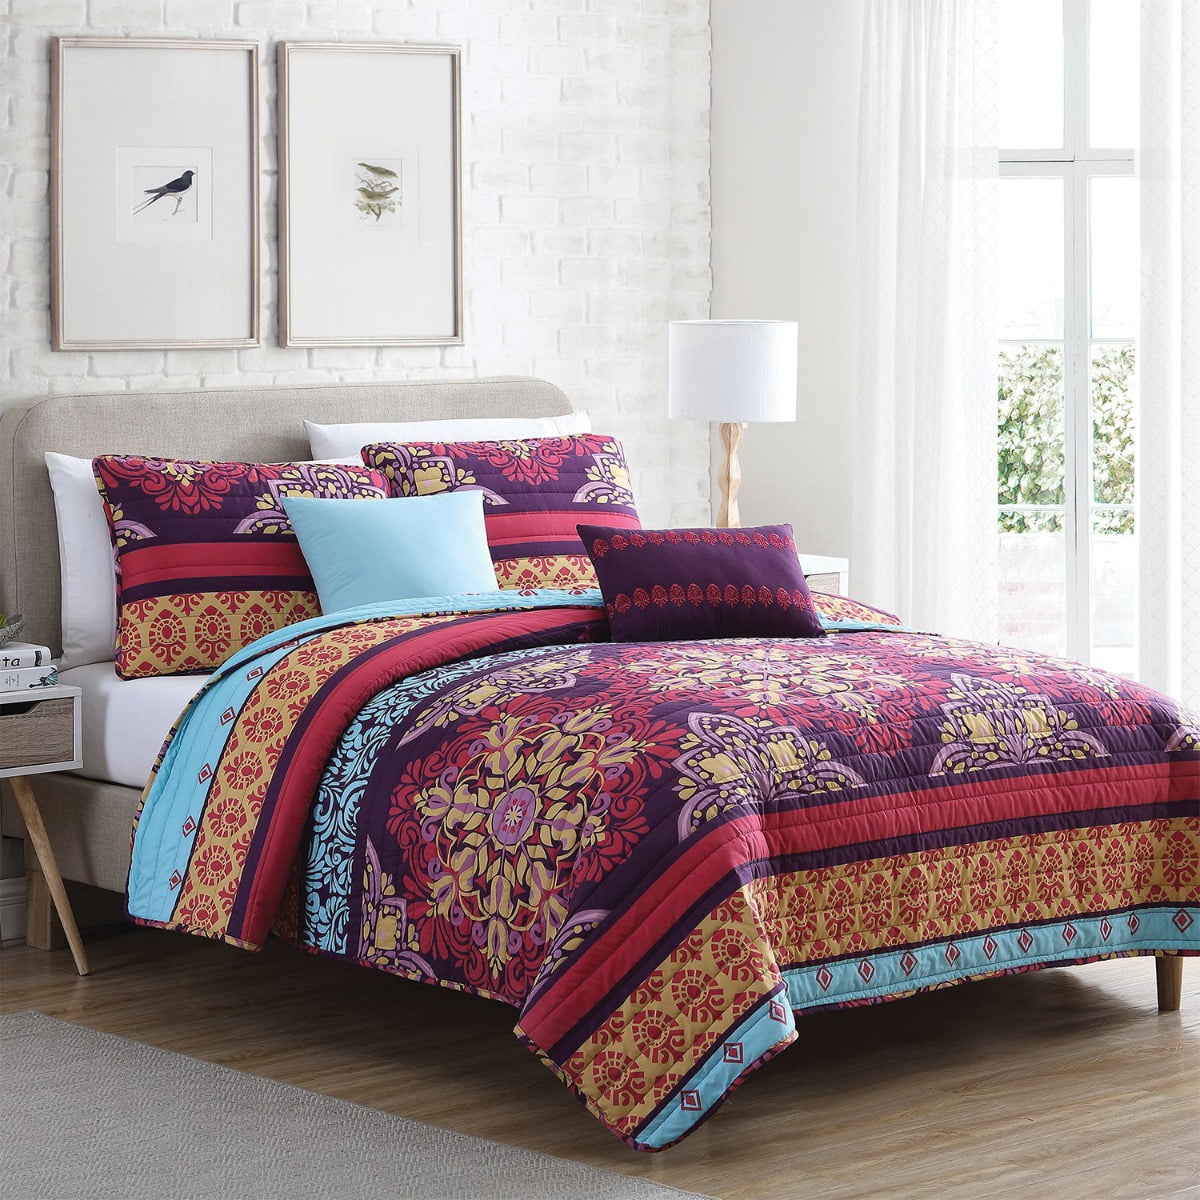 BEAUTIFUL CHIC RED BLUE TEAL PURPLE TROPICAL GLOBAL BOHEMIAN MOROCCAN QUILT SET 